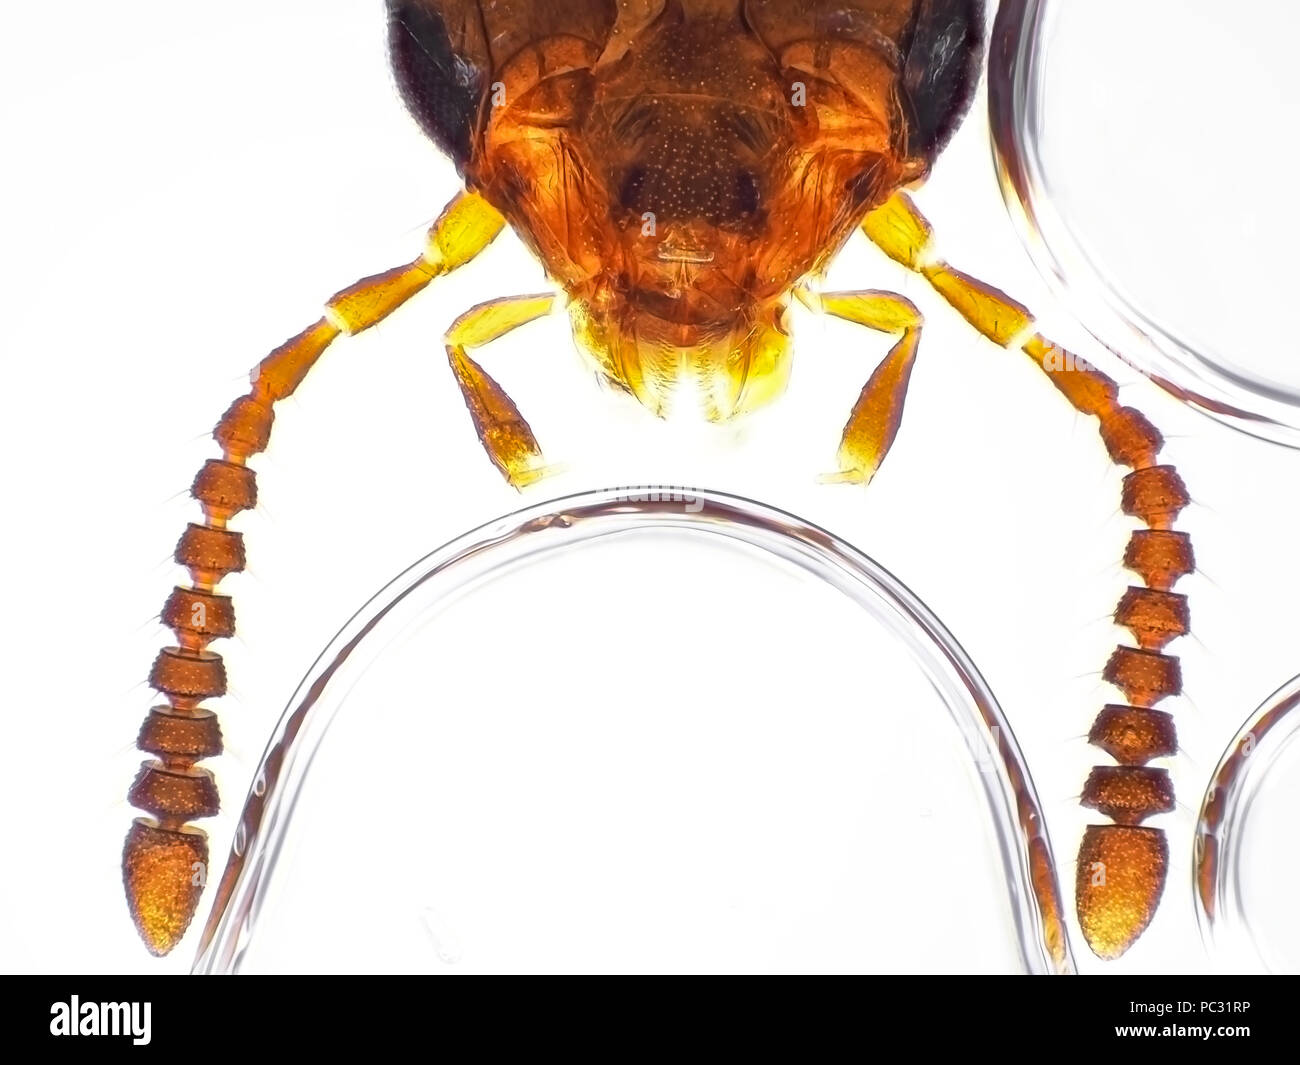 Light micrograph of a tiny rove beetle (Staphylinidae) head, pictured area is approximately 1mm wide Stock Photo